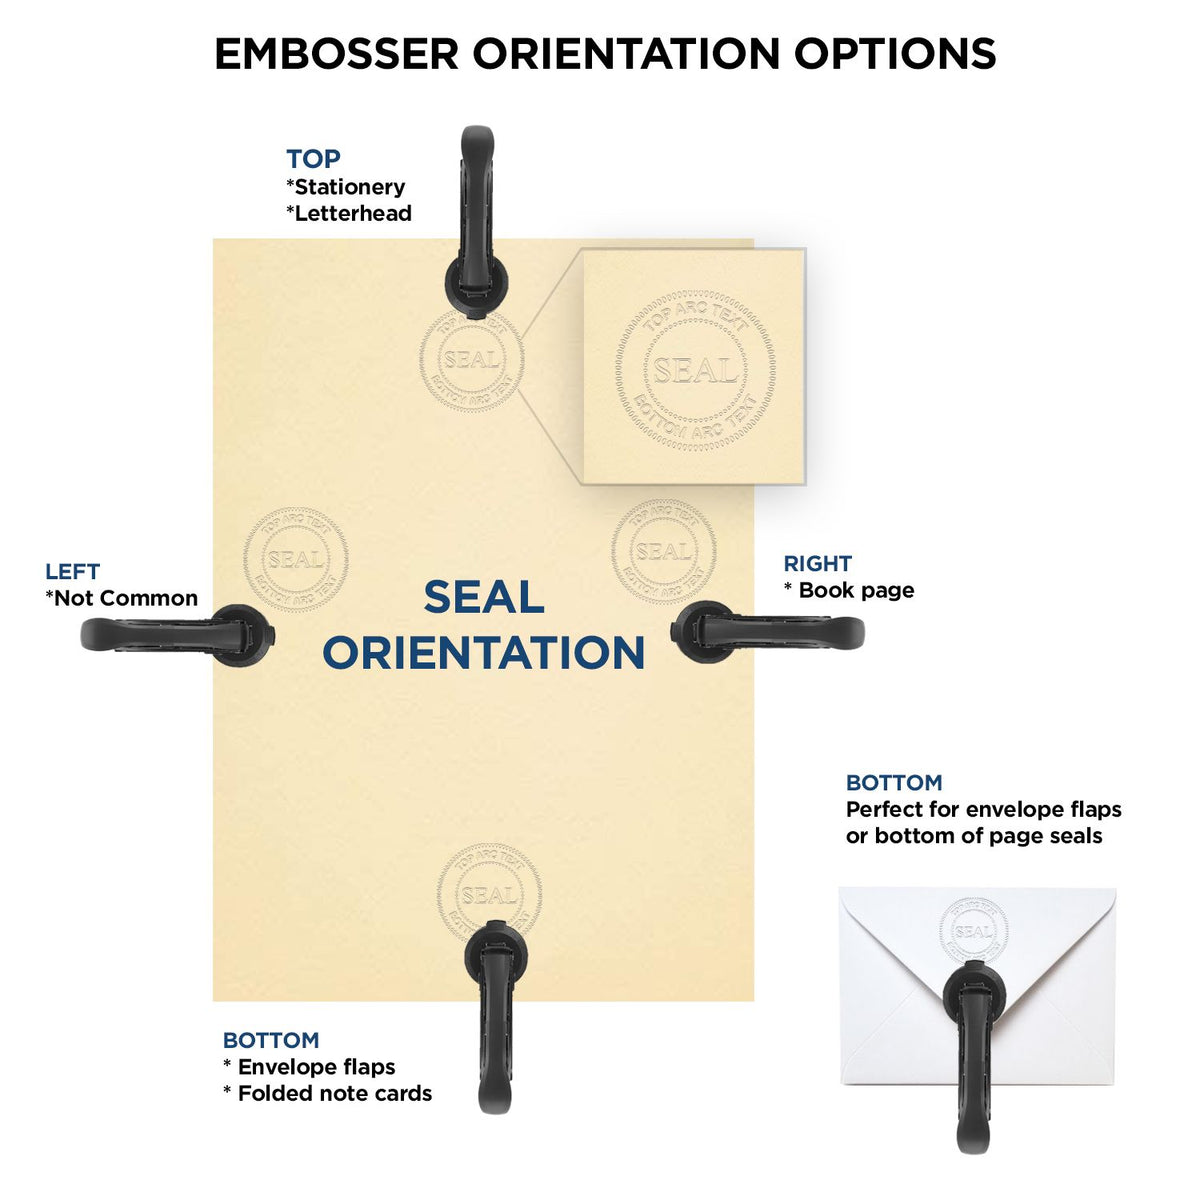 An infographic for the Gift New Hampshire Architect Seal showing embosser orientation, this is showing examples of a top, bottom, right and left insert.